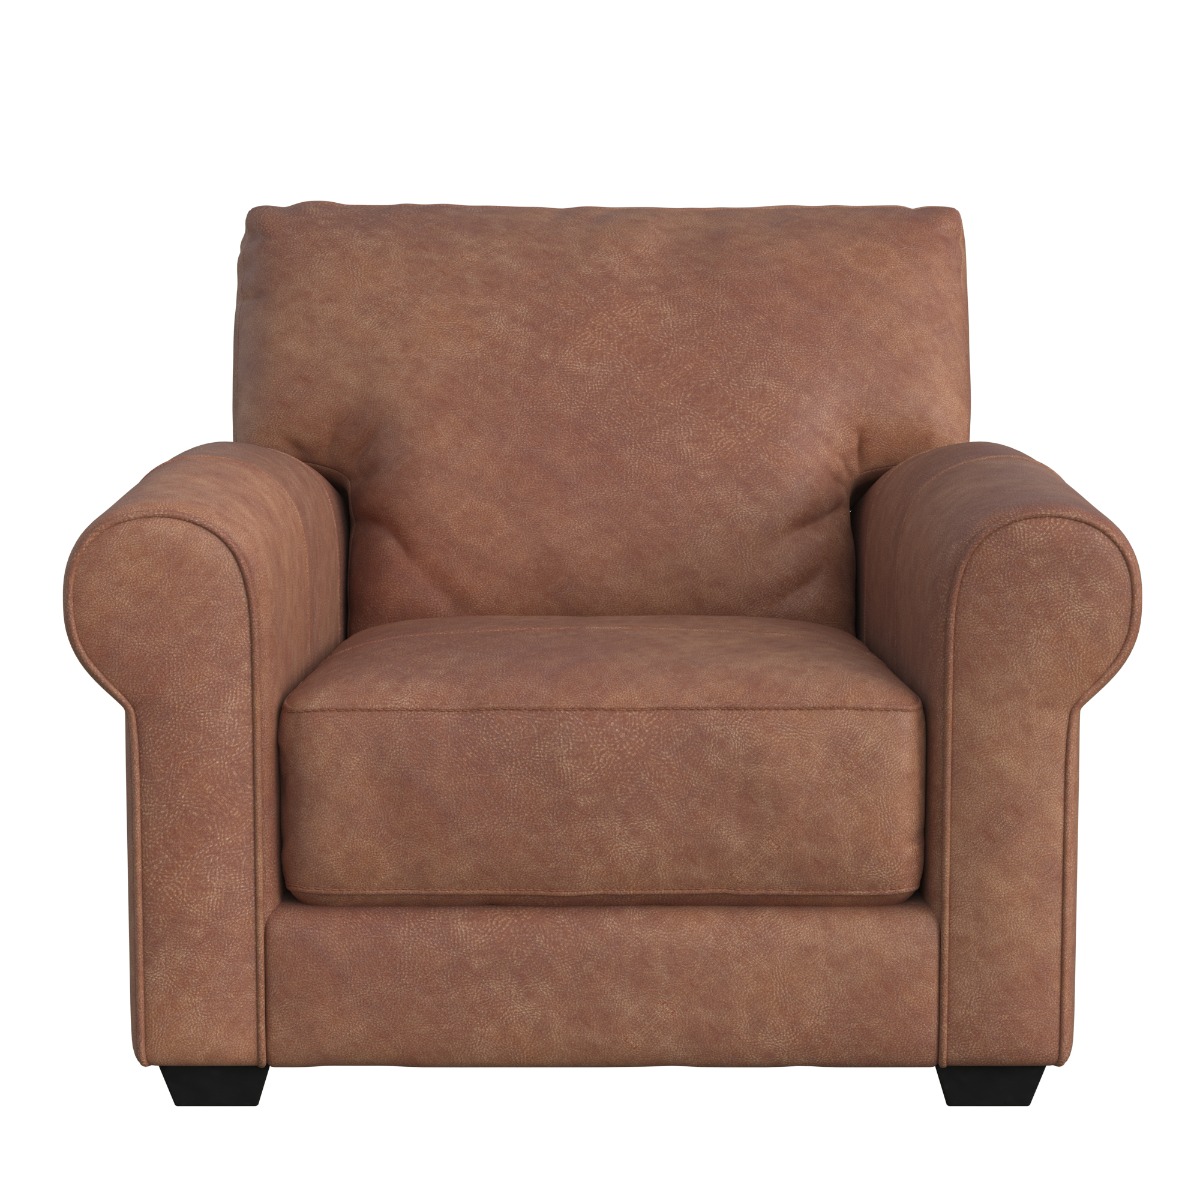 Houston Armchair, Brown Leather | Barker & Stonehouse